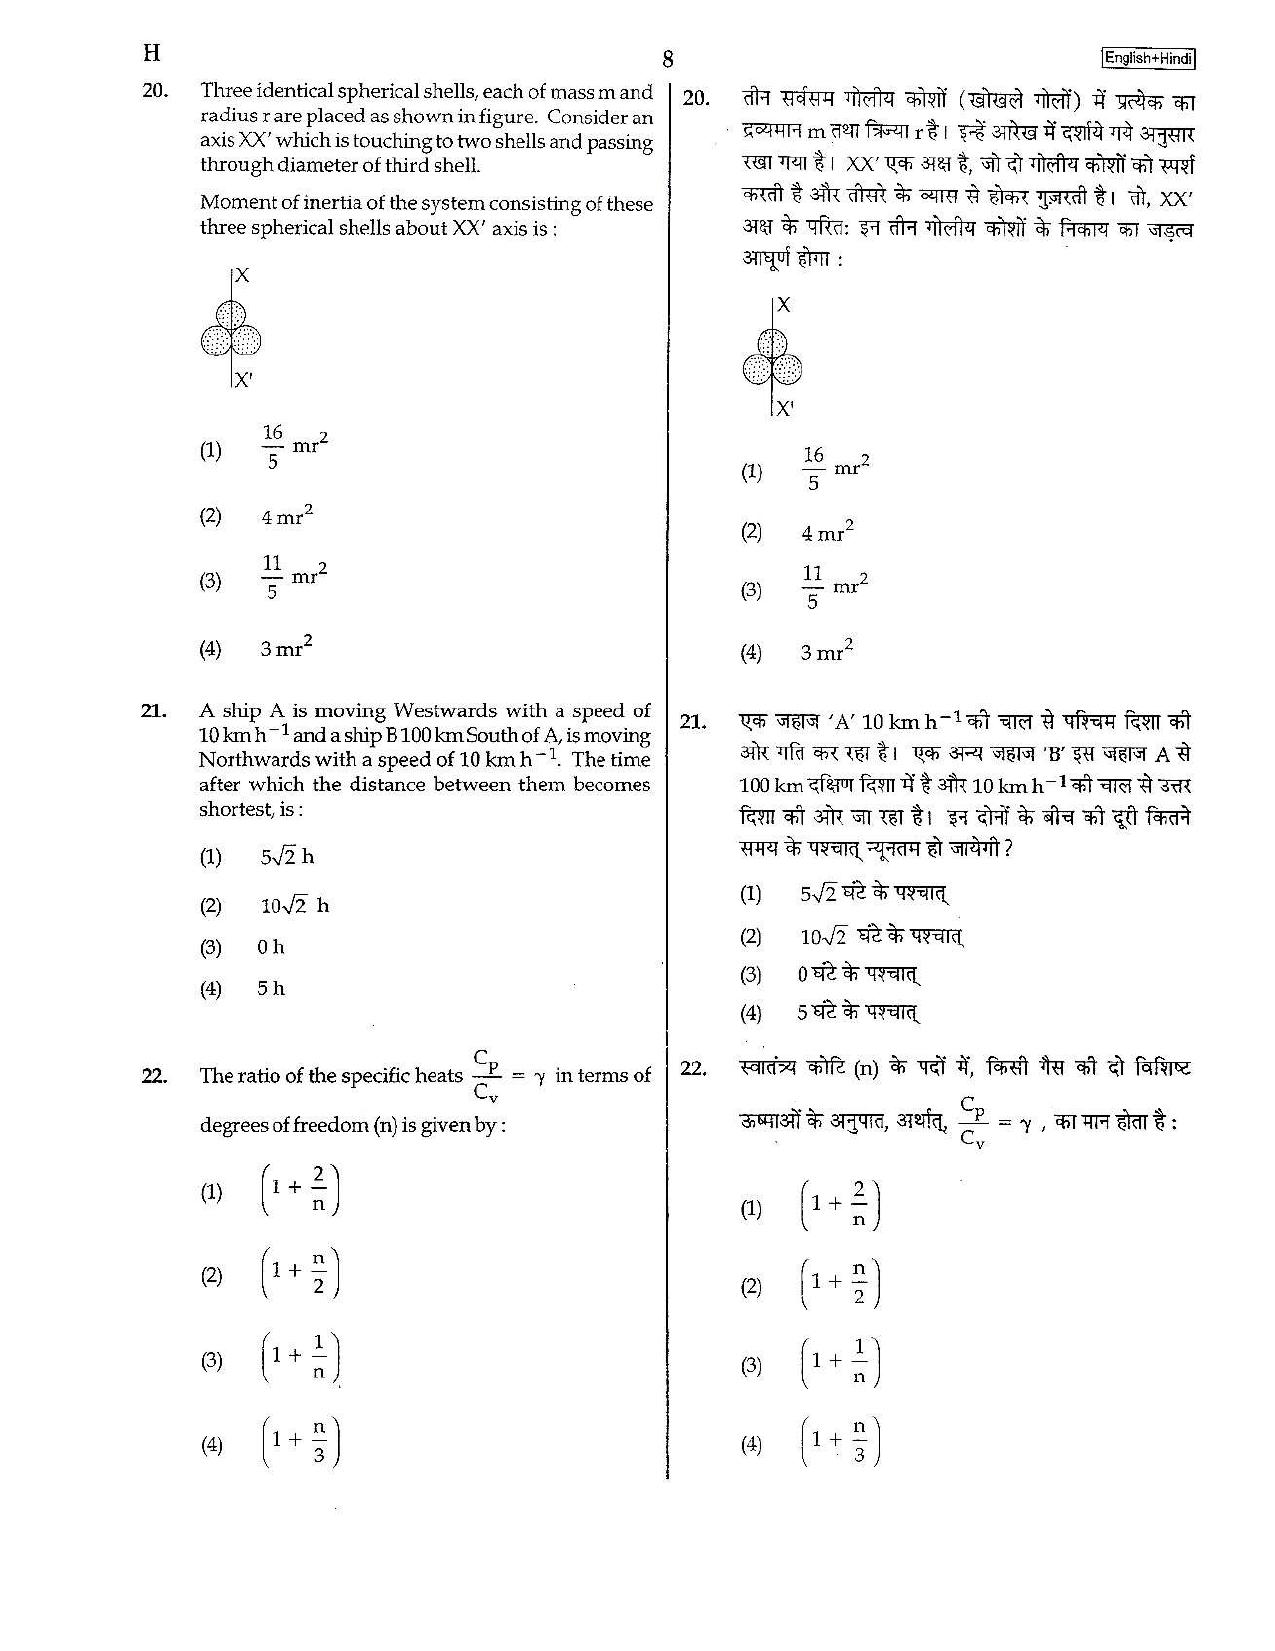 NEET Code H 2015 Question Paper - Page 8